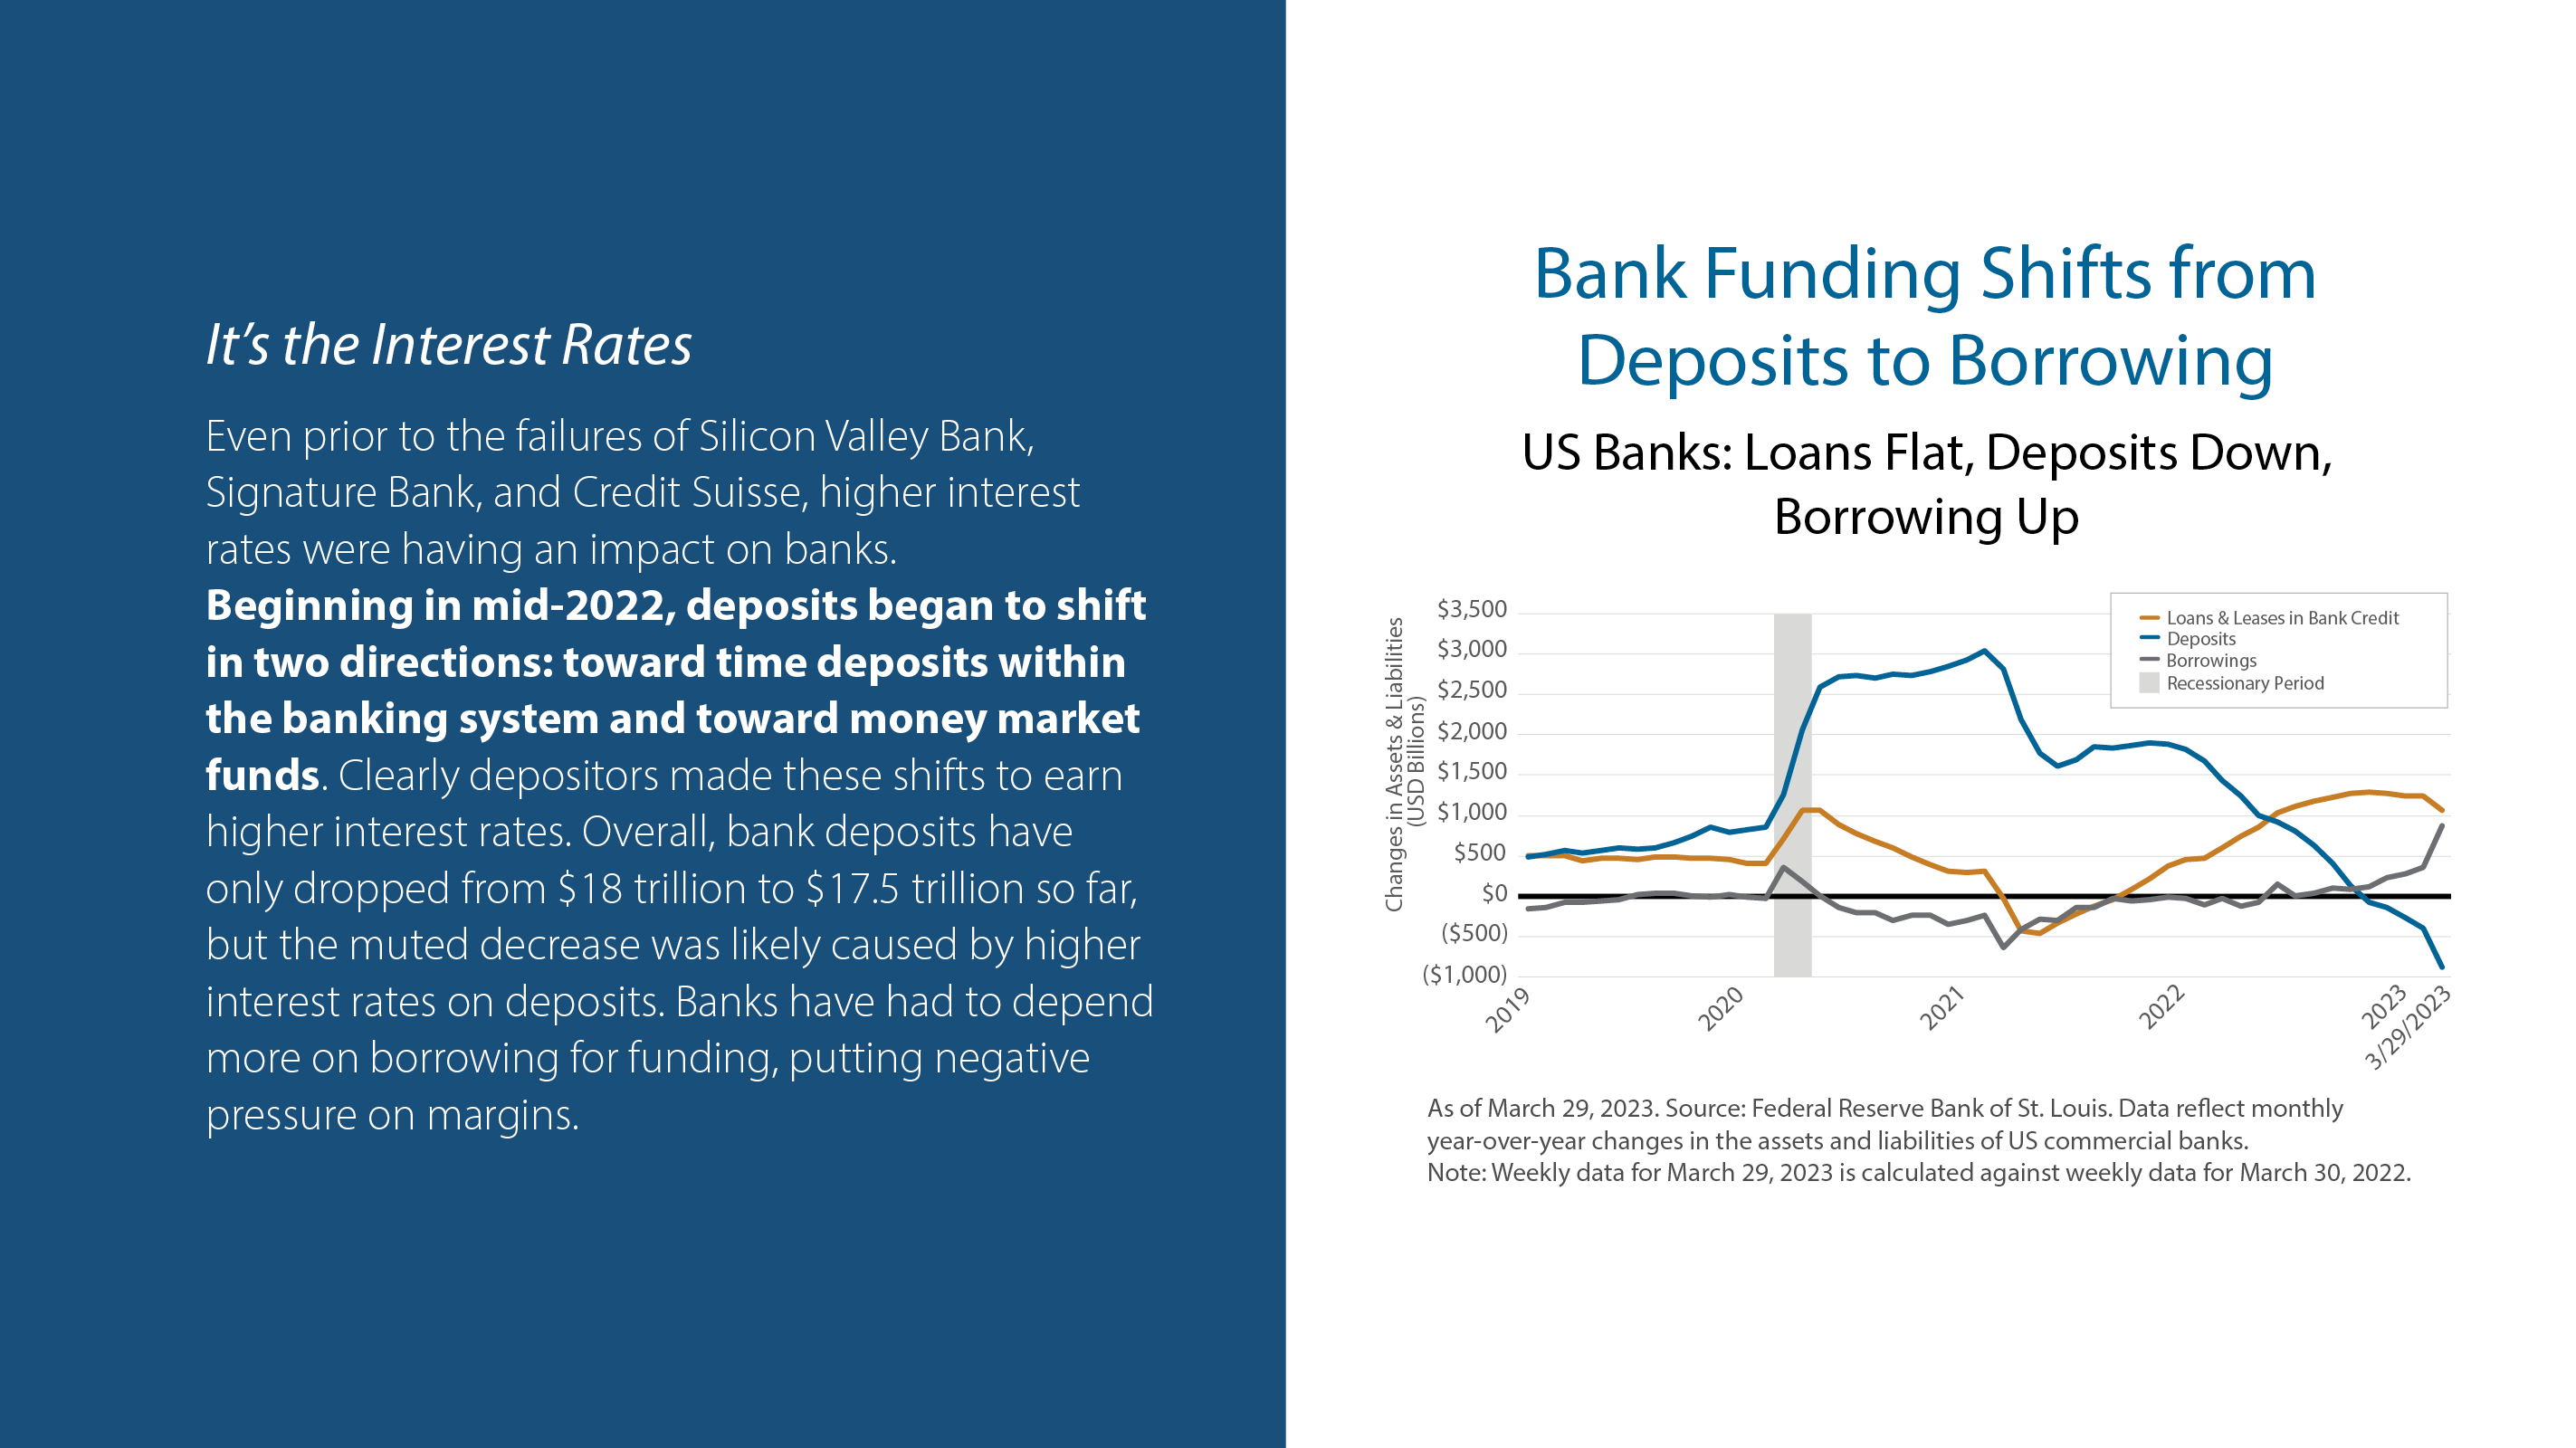 Bank Funding Shifts from Deposits to Borrowing